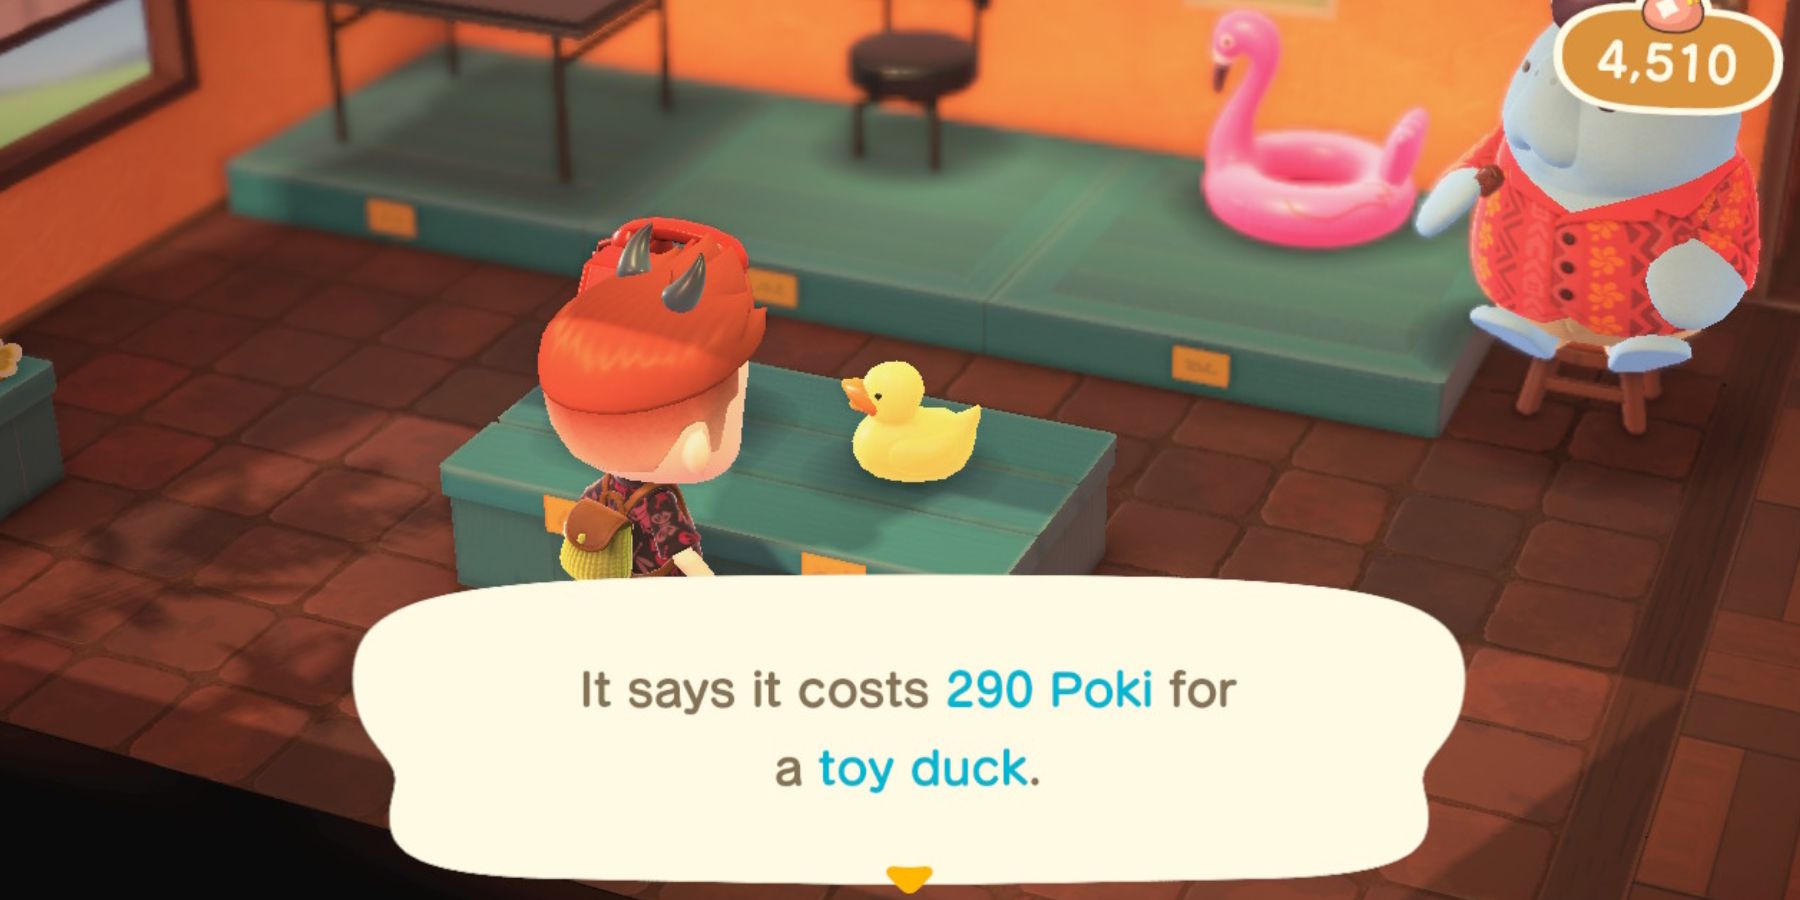 A player examines a toy duck on sale for Poki at the Happy Home Paradise DLC Office Shop in Animal Crossing: New Horizons